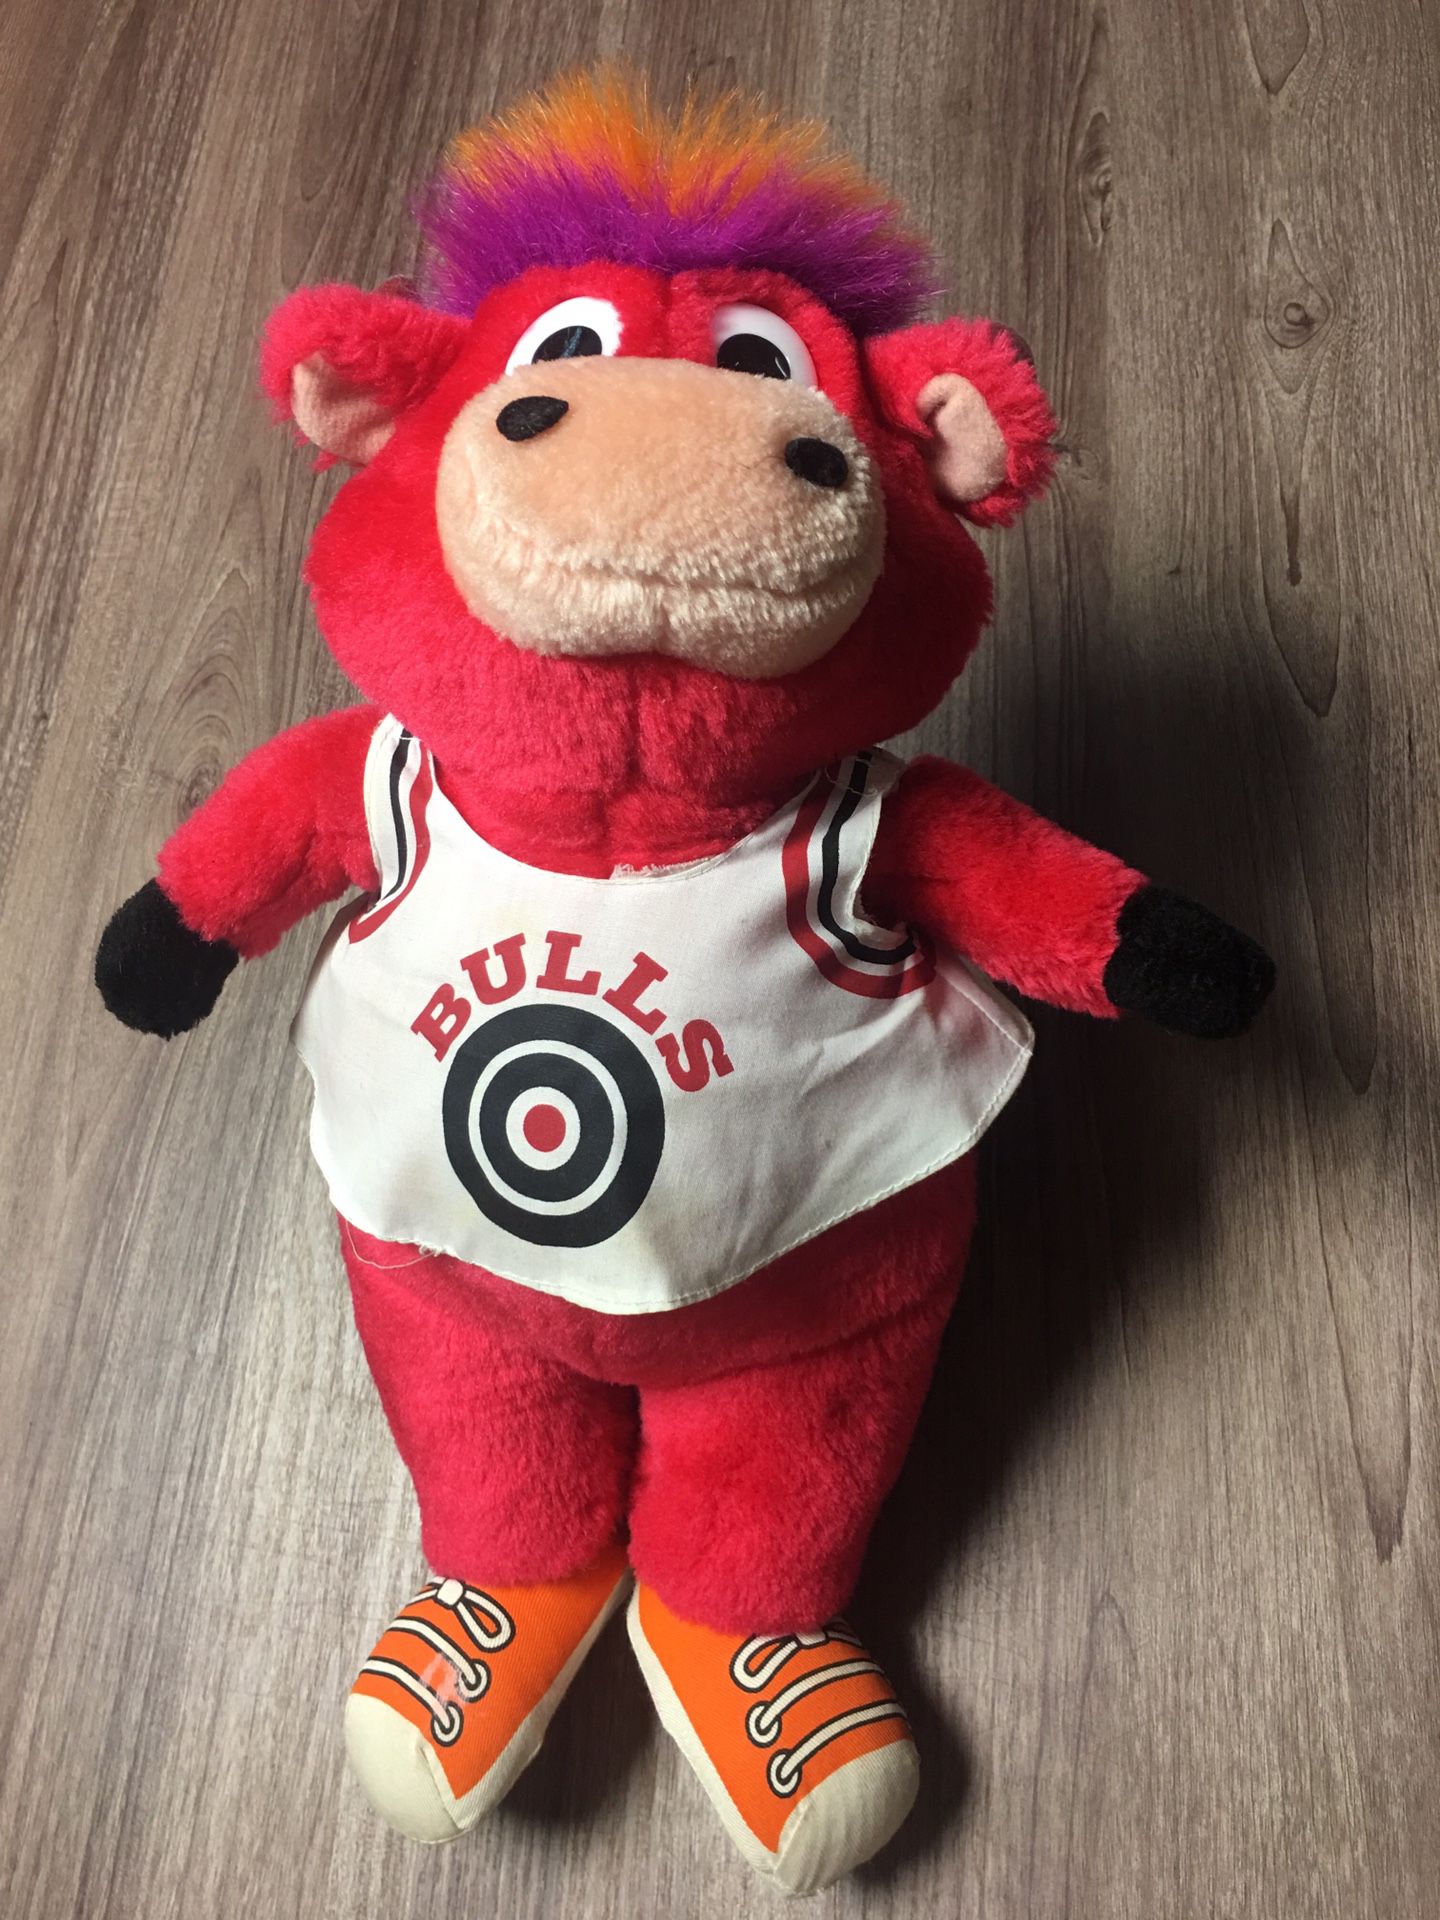 Chicago Bulls Benny the Bull - 8 Stuffed - EXCELLENT CONDITION